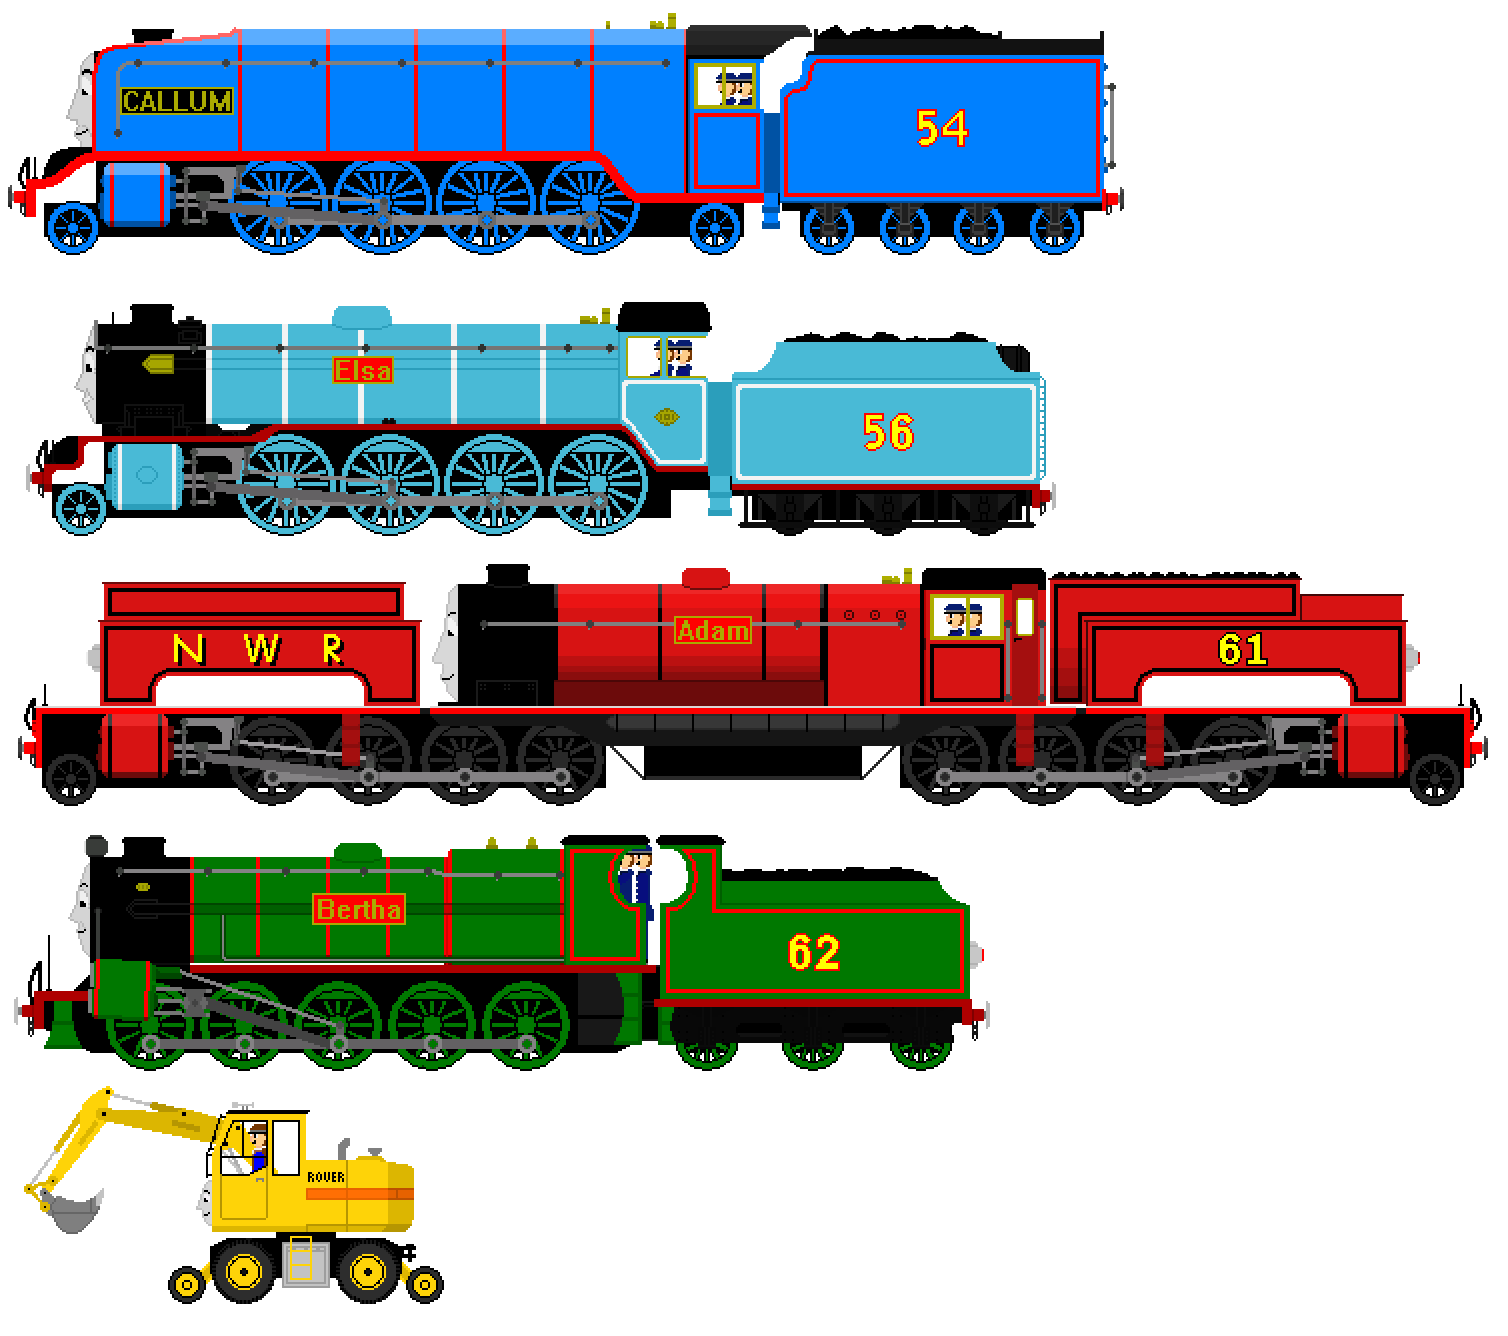 Five NEW Engines in the Shed by JamesFan1991 on DeviantArt